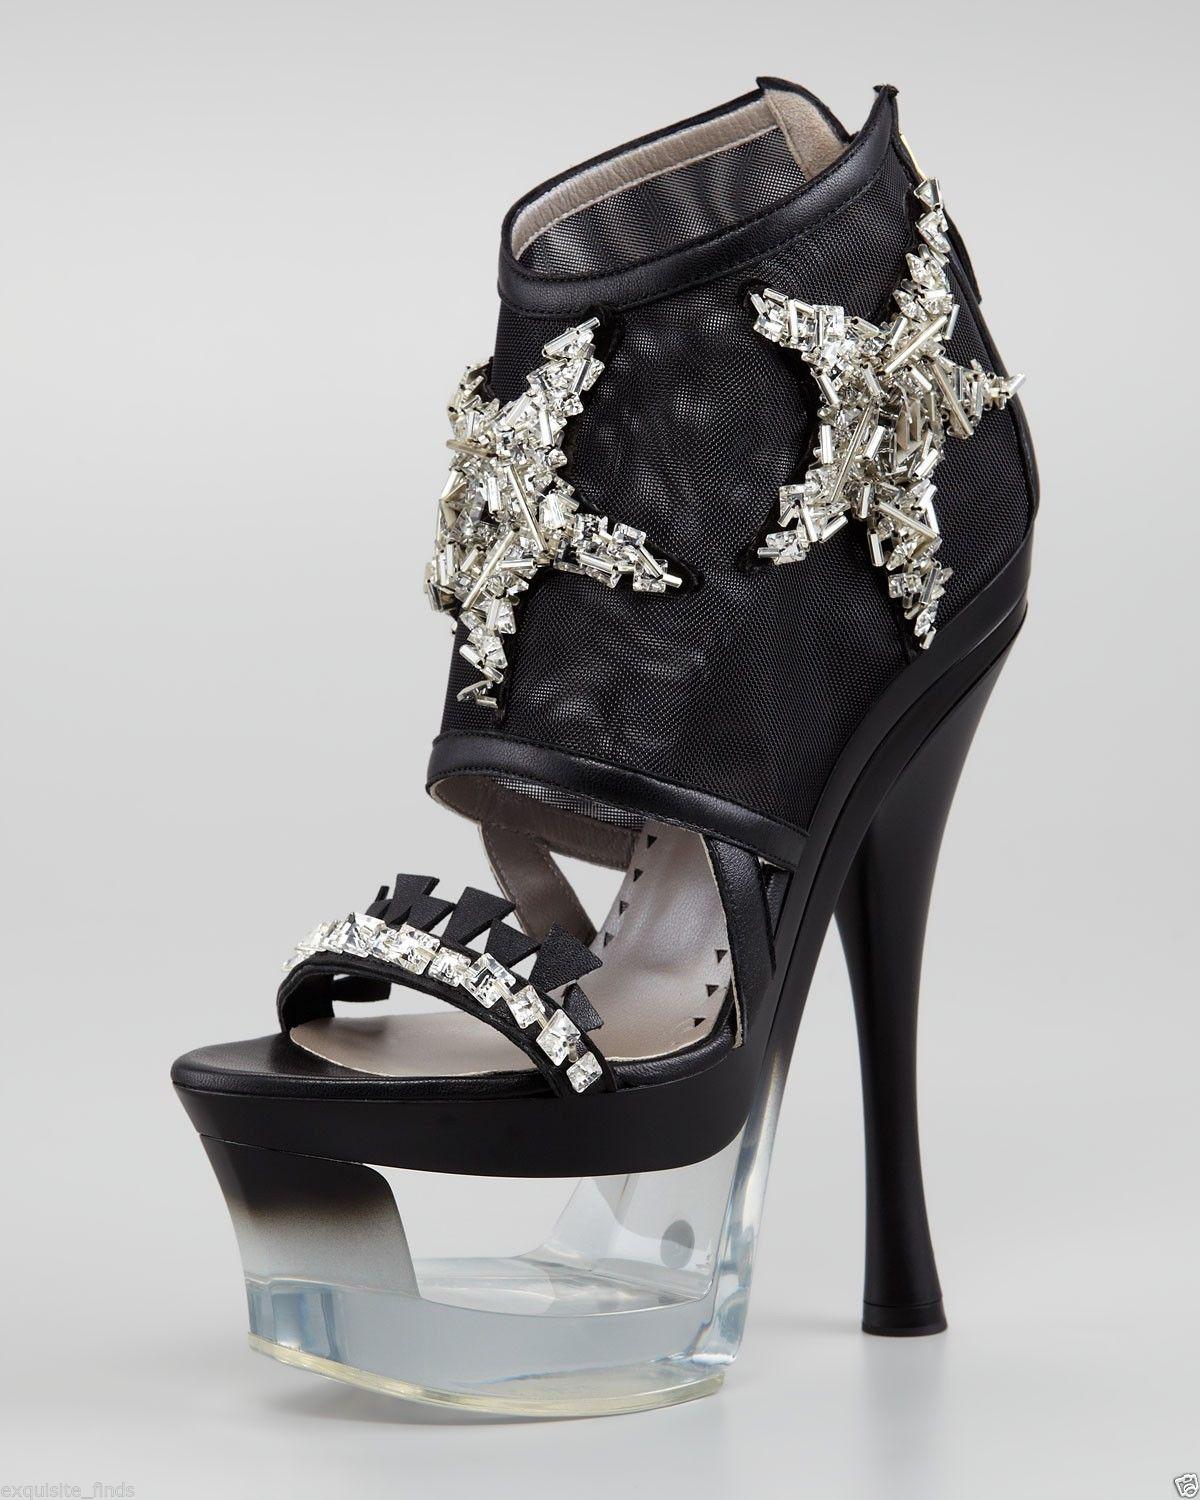 VERSACE PLATFORM SHOES

Versace heads to the sea to find inspiration for this ornate shoe. Dazzling rhinestones and a plexiglass platform speak to the brand's love of the ornate.
Mesh and lambskin upper with silver starfish beading.
6